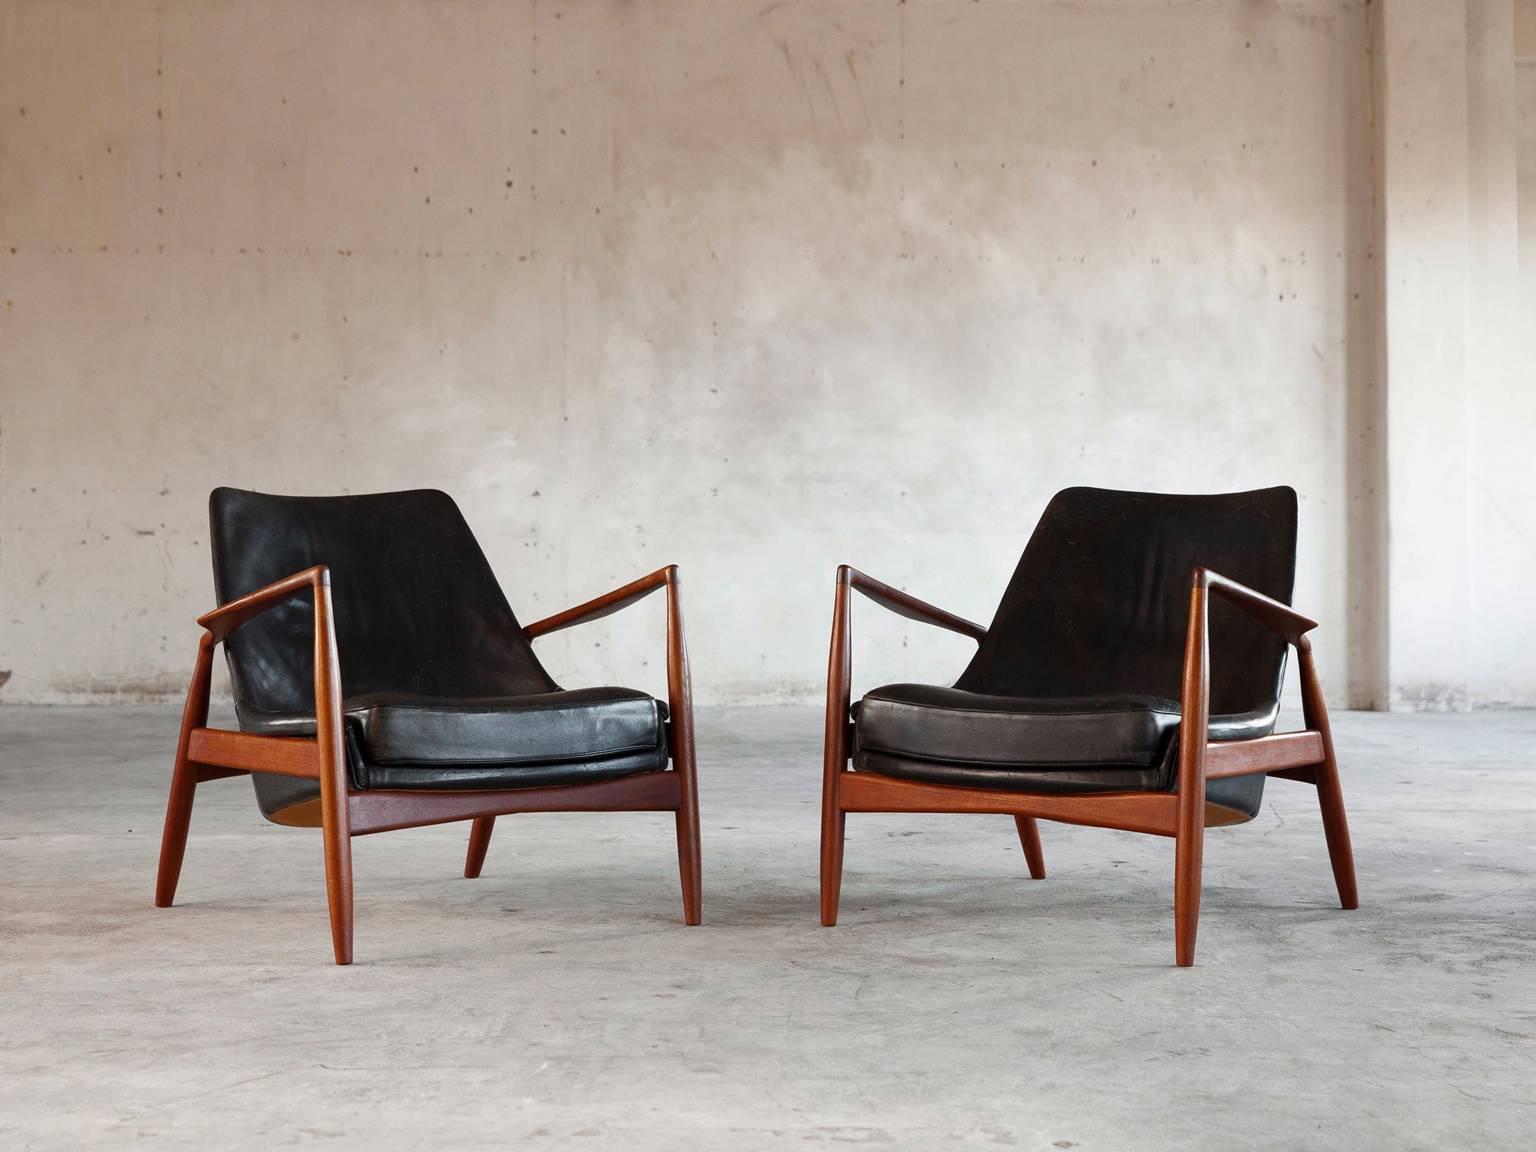 Set of two 'Seal' lounge chairs model 503-799, in teak and leather, by Ib Kofod-Larsen for OPE, Sweden, 1956. 

Beautiful and iconic Seal lounge chairs. The well-crafted frame of this chair is made of a dark colored teak. It shows very nice